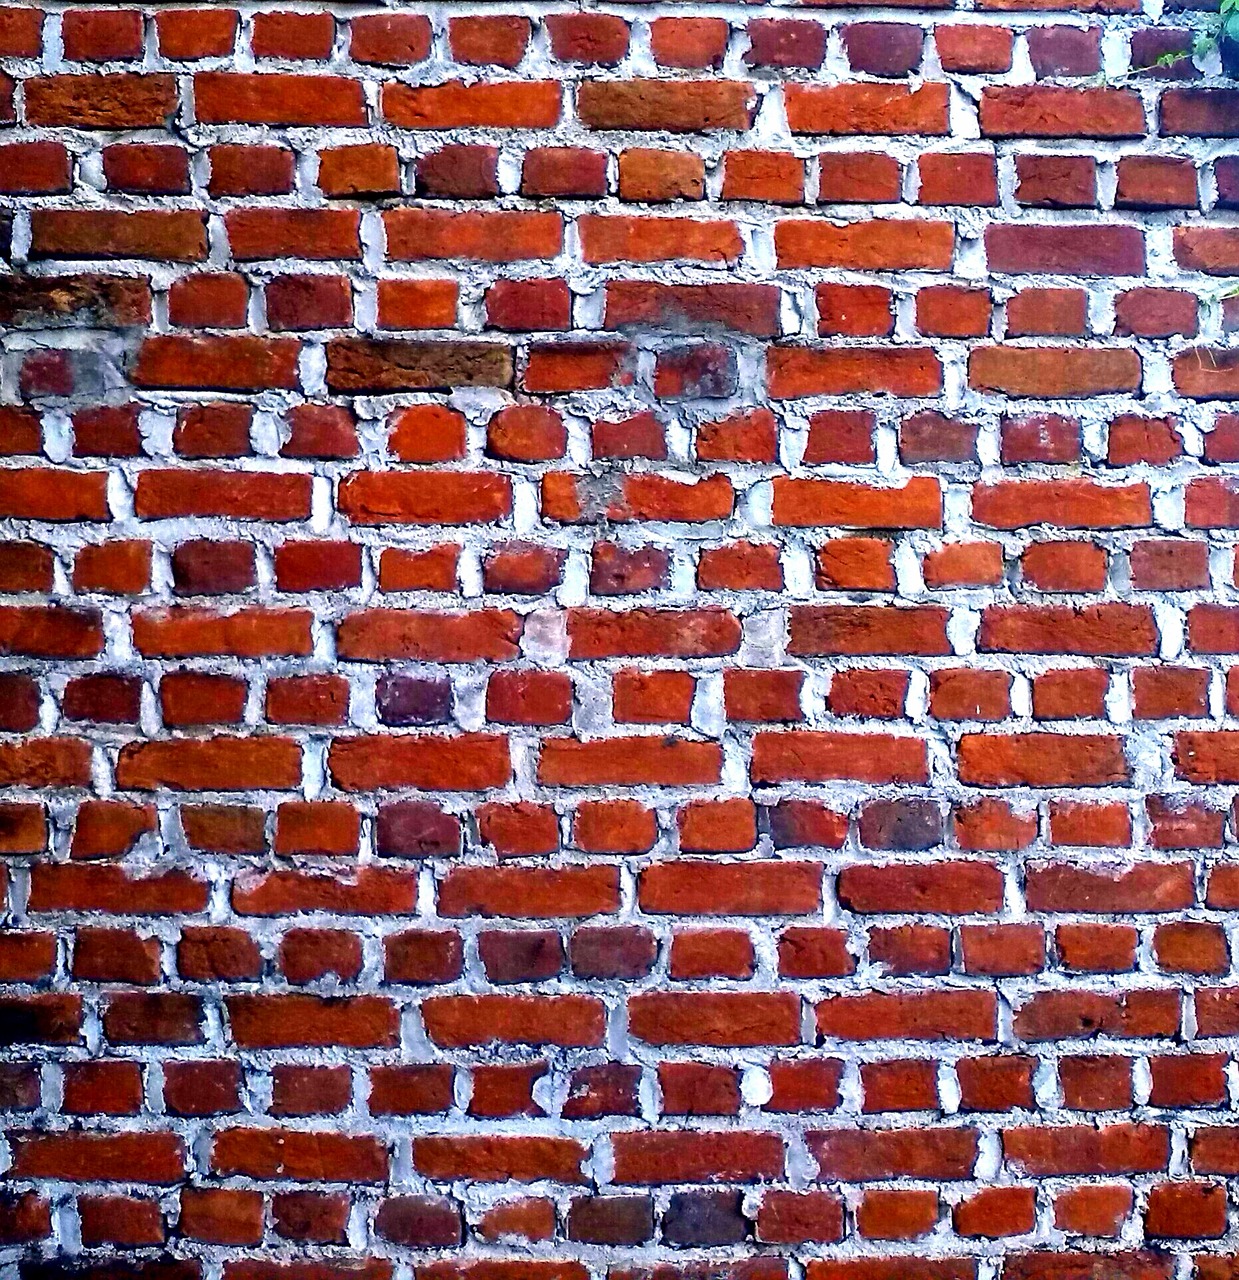 a fire hydrant in front of a brick wall, by Yi Jaegwan, minimalism, tiling texture, red bricks, a gigantic wall, 1647